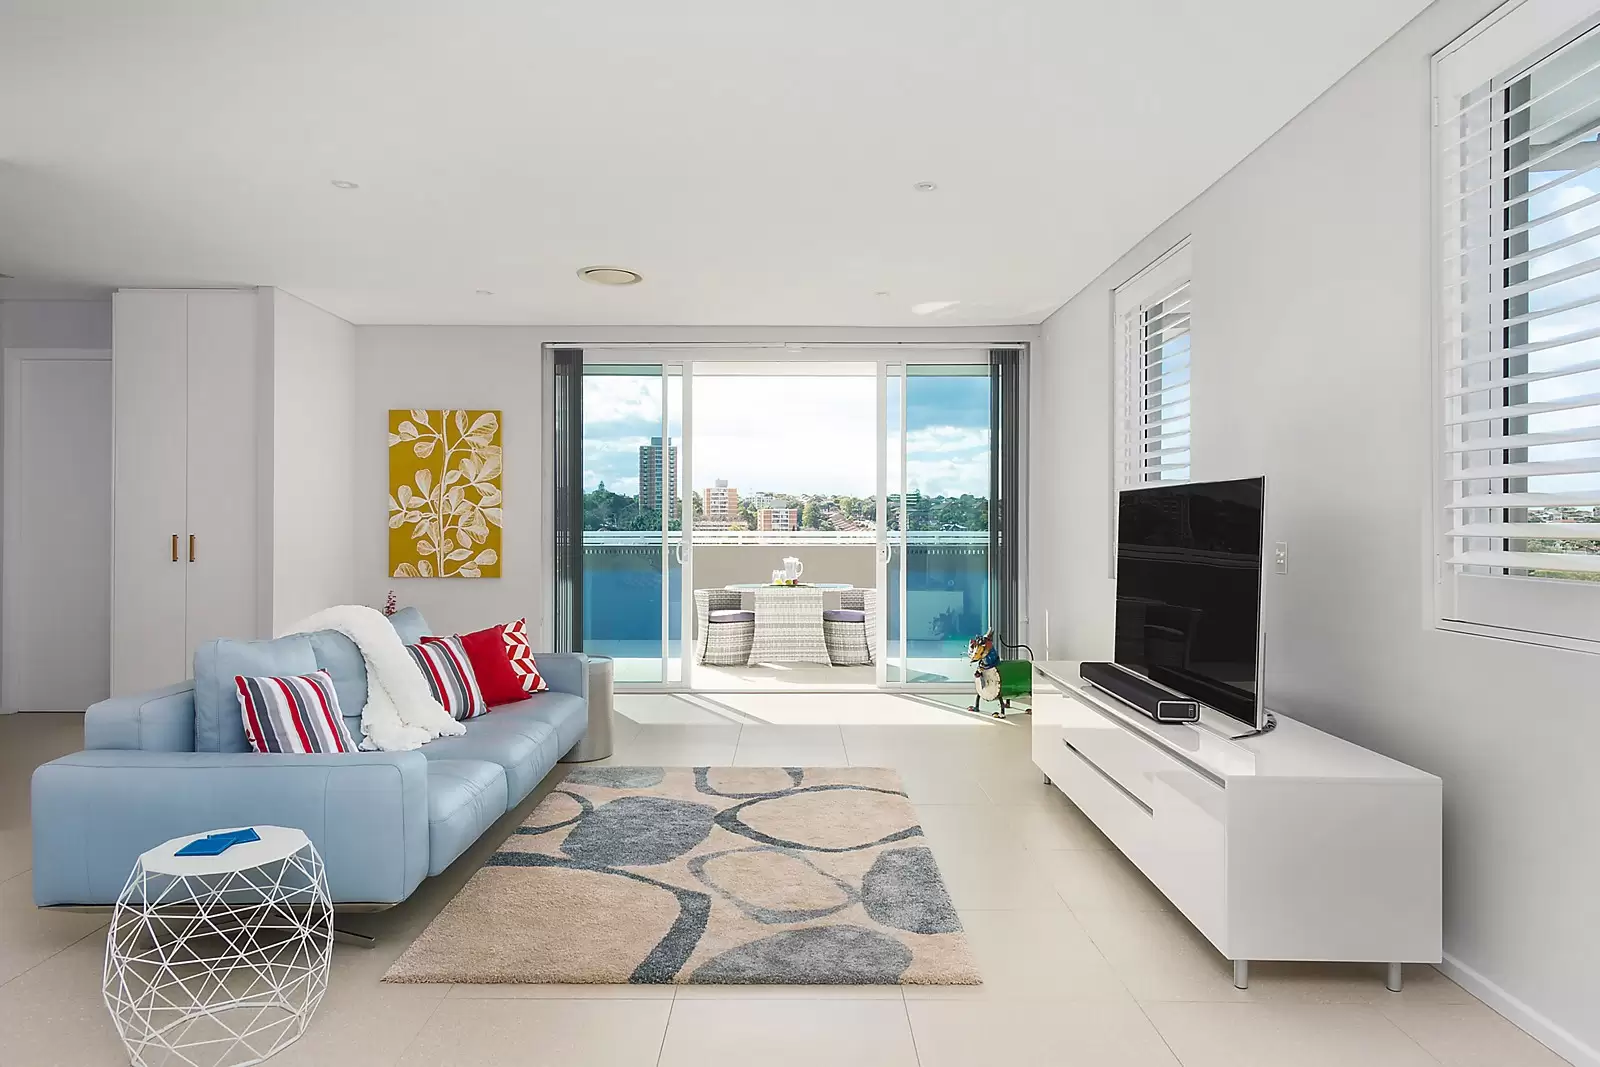 Photo #5: 8/38 Coogee Bay Road, Randwick - Sold by Sydney Sotheby's International Realty